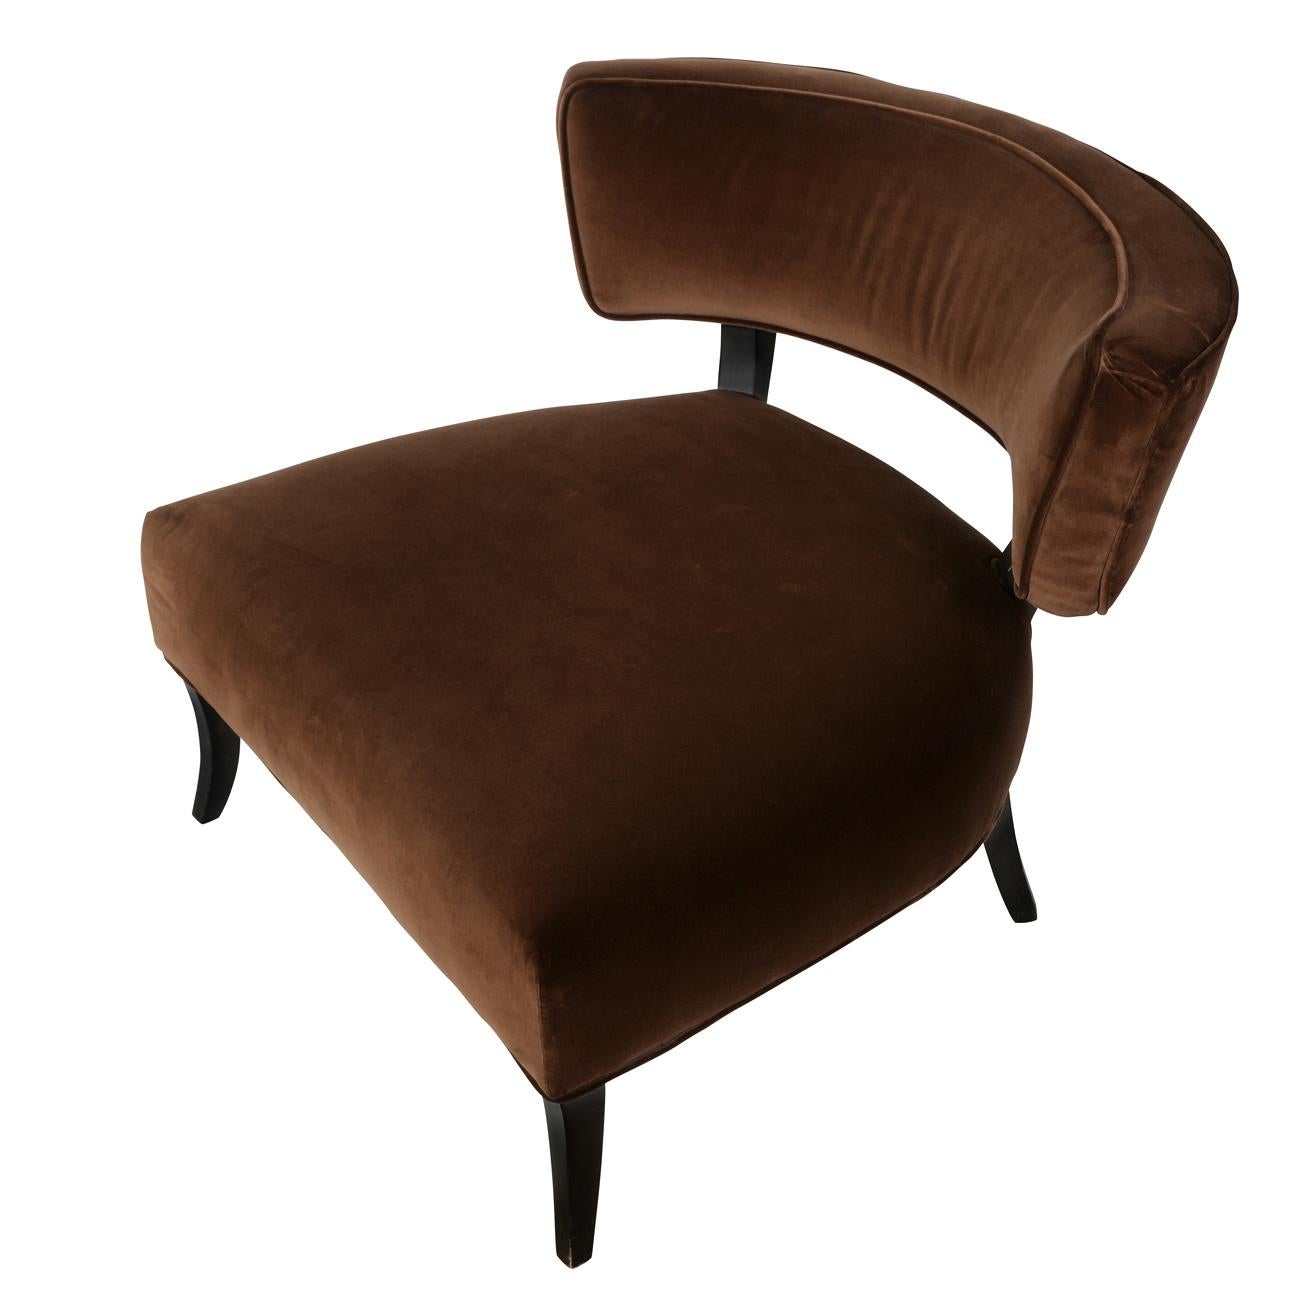 A vintage curved brown oversized chair in James Mont style with wood legs and velvet upholstery.